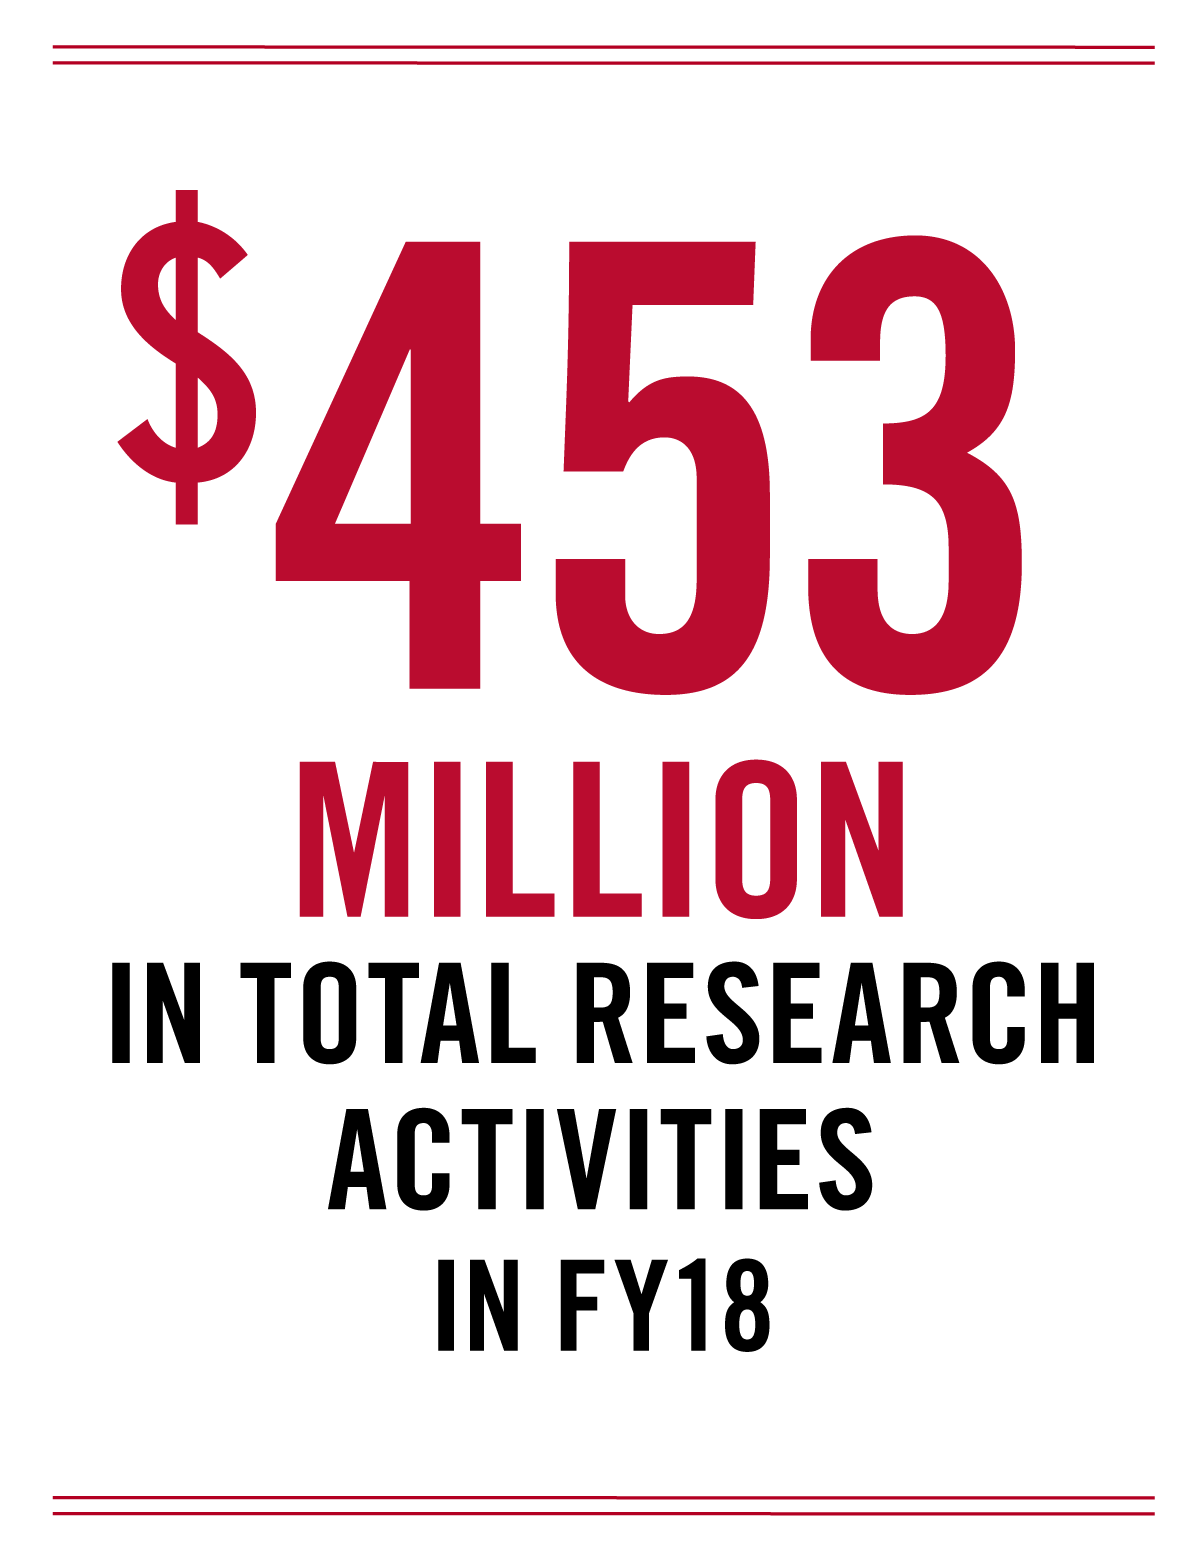 $453 million in total research activities in FY18